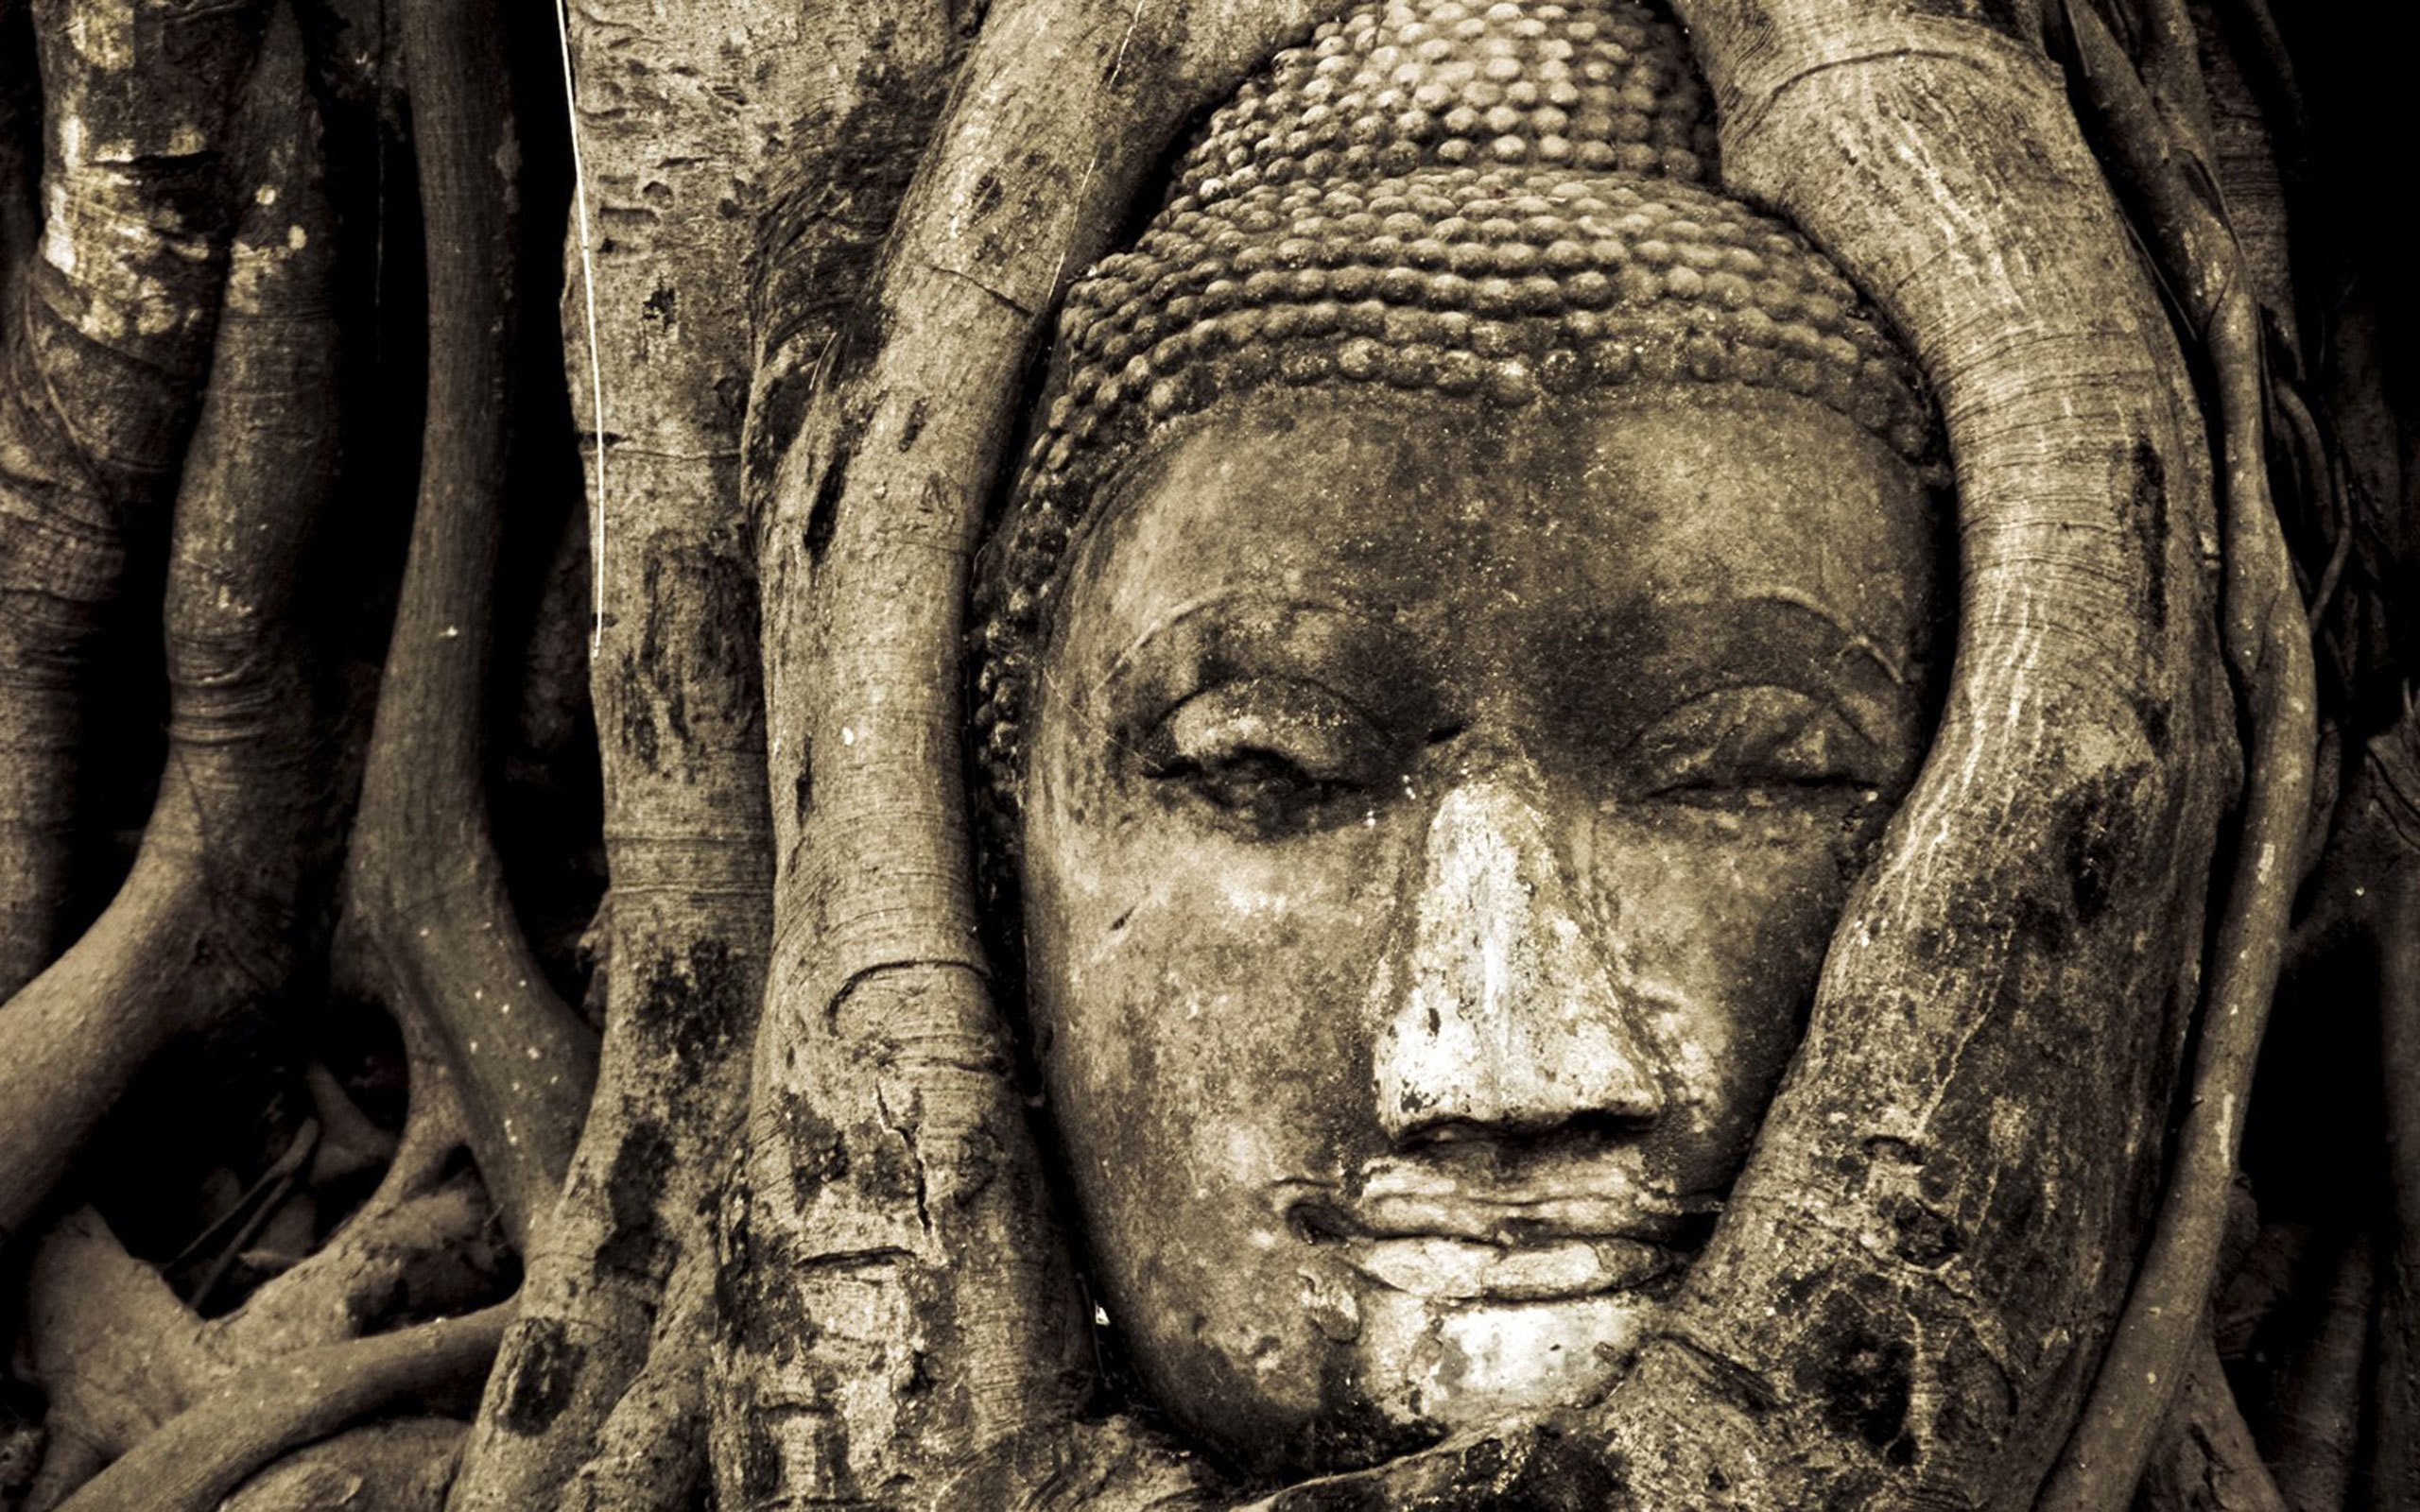 General 2560x1600 nature trees branch Buddha Buddhism Thailand monochrome sepia sculpture National Geographic religious